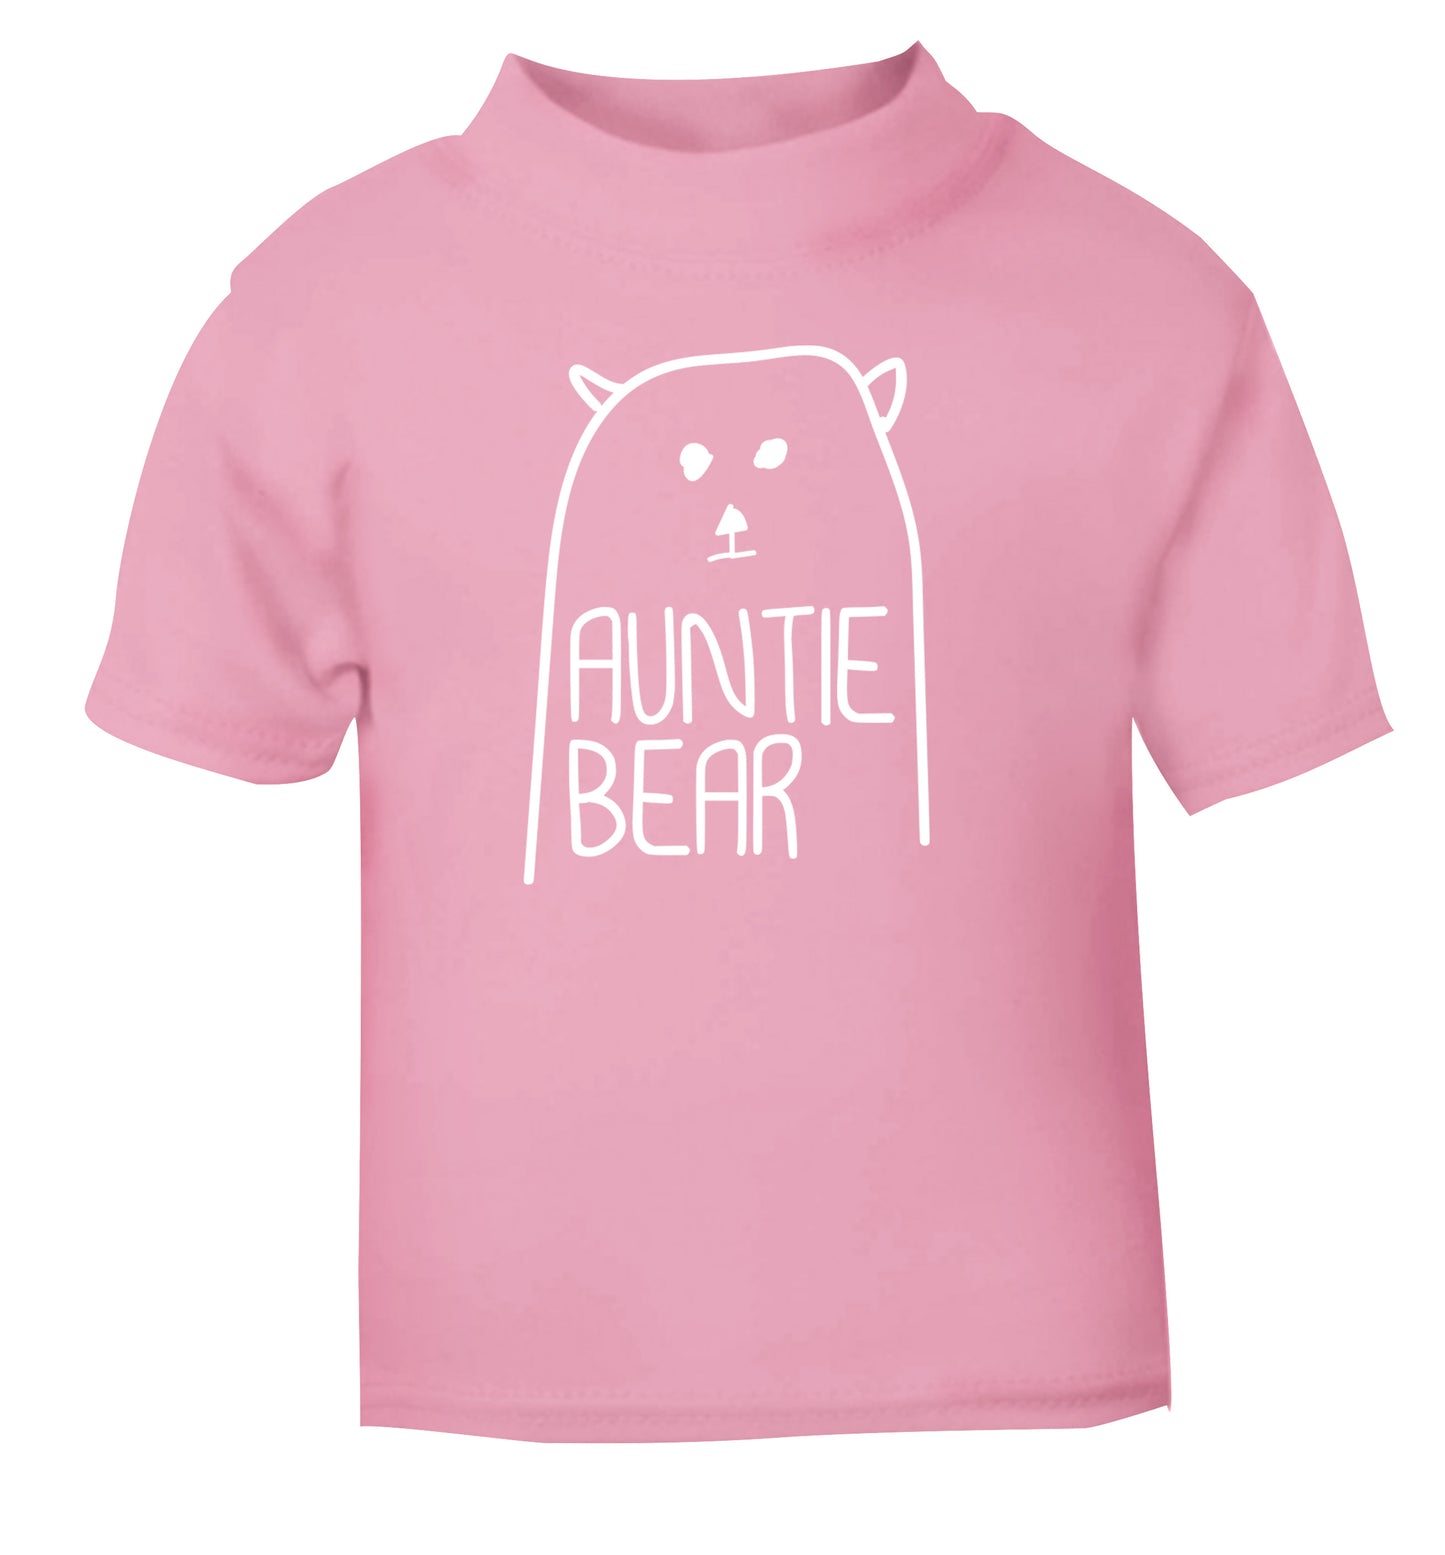 Auntie bear light pink Baby Toddler Tshirt 2 Years